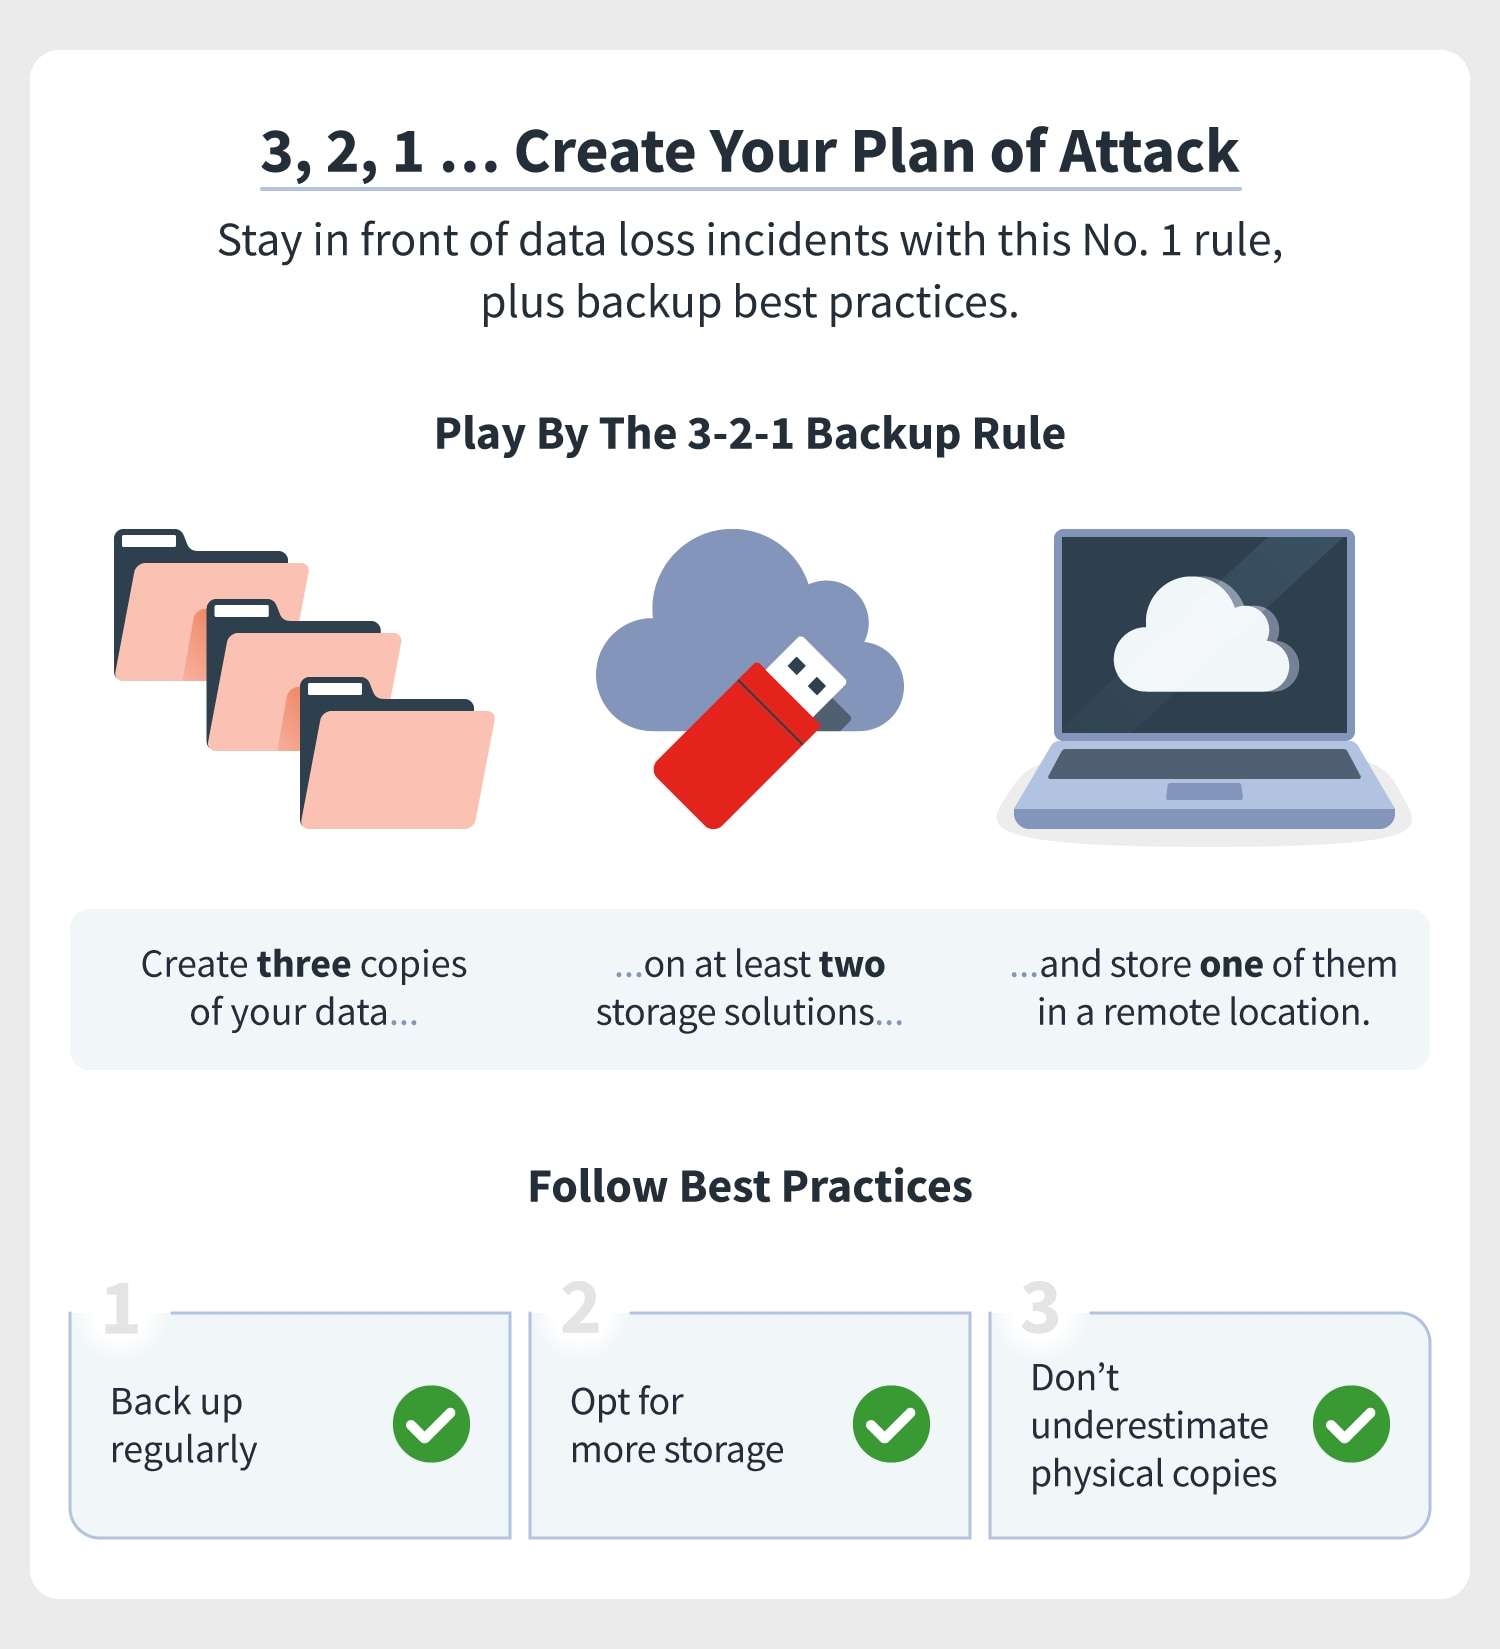 04-3-2-1-create-your-own-plan-of-attack